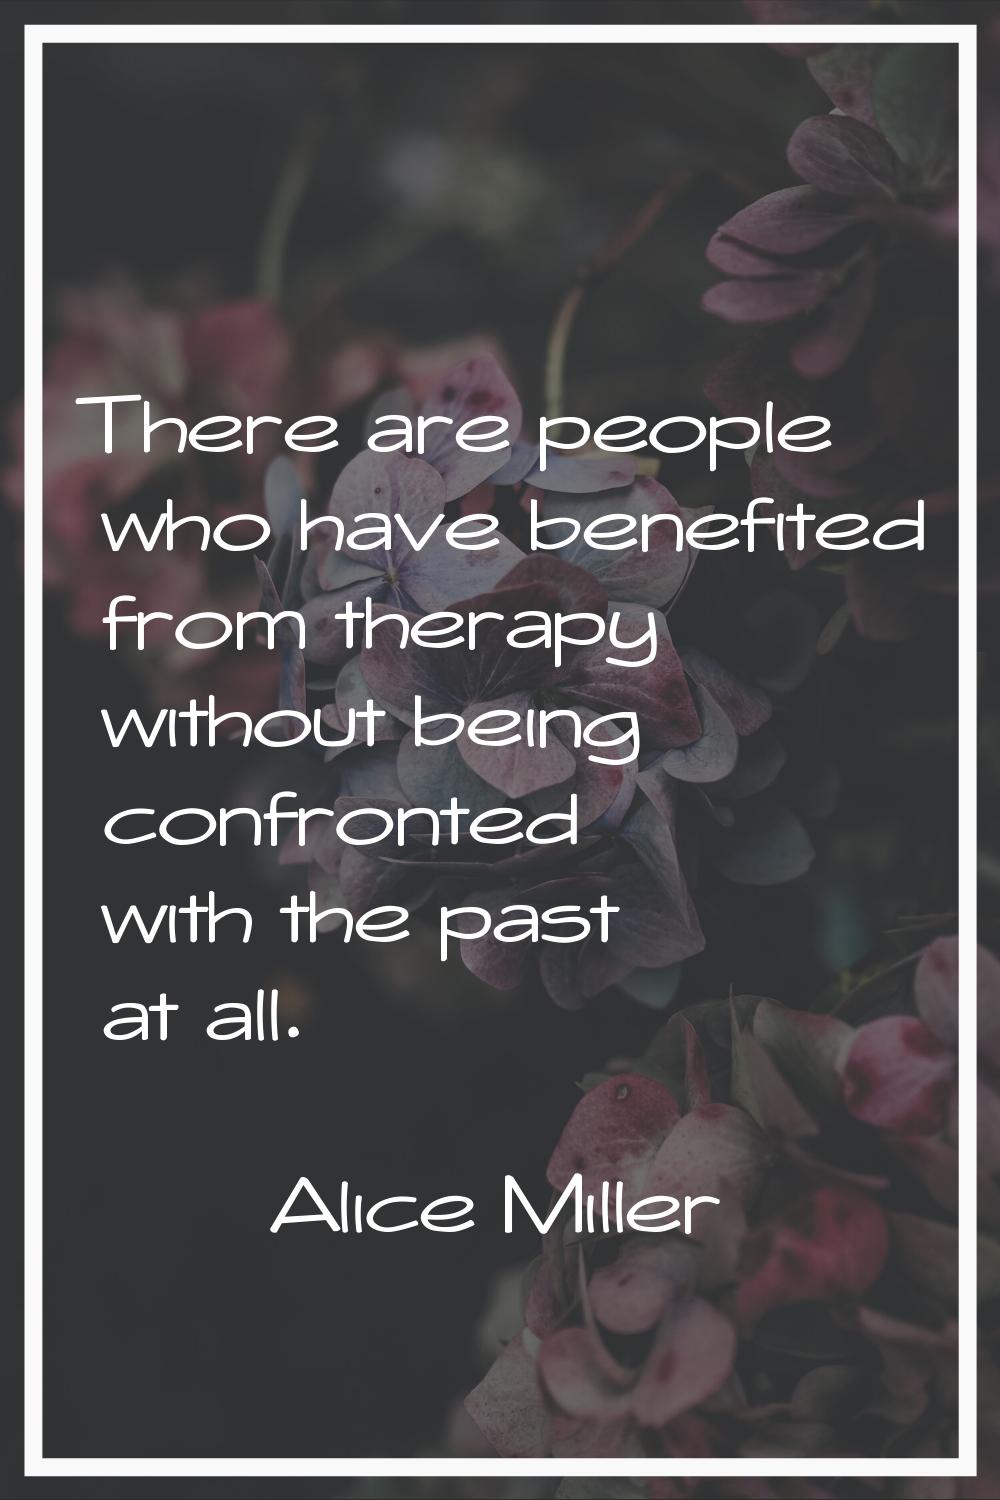 There are people who have benefited from therapy without being confronted with the past at all.